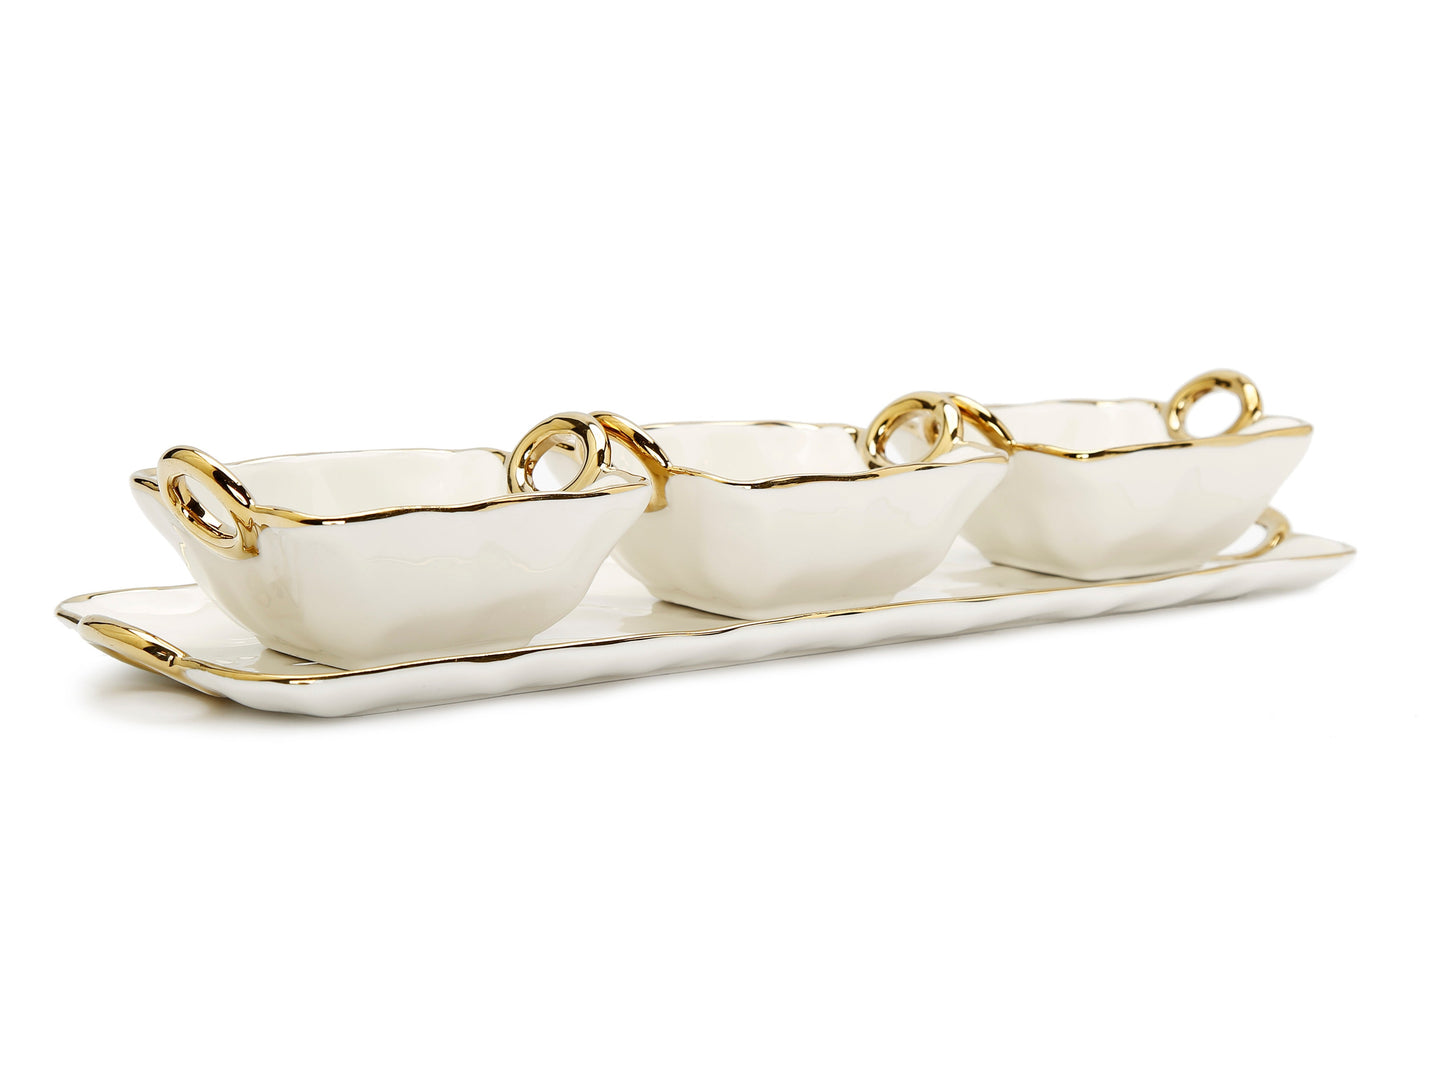 White Porcelain Relish Dish with 3 Bowls Gold Trim and Handles